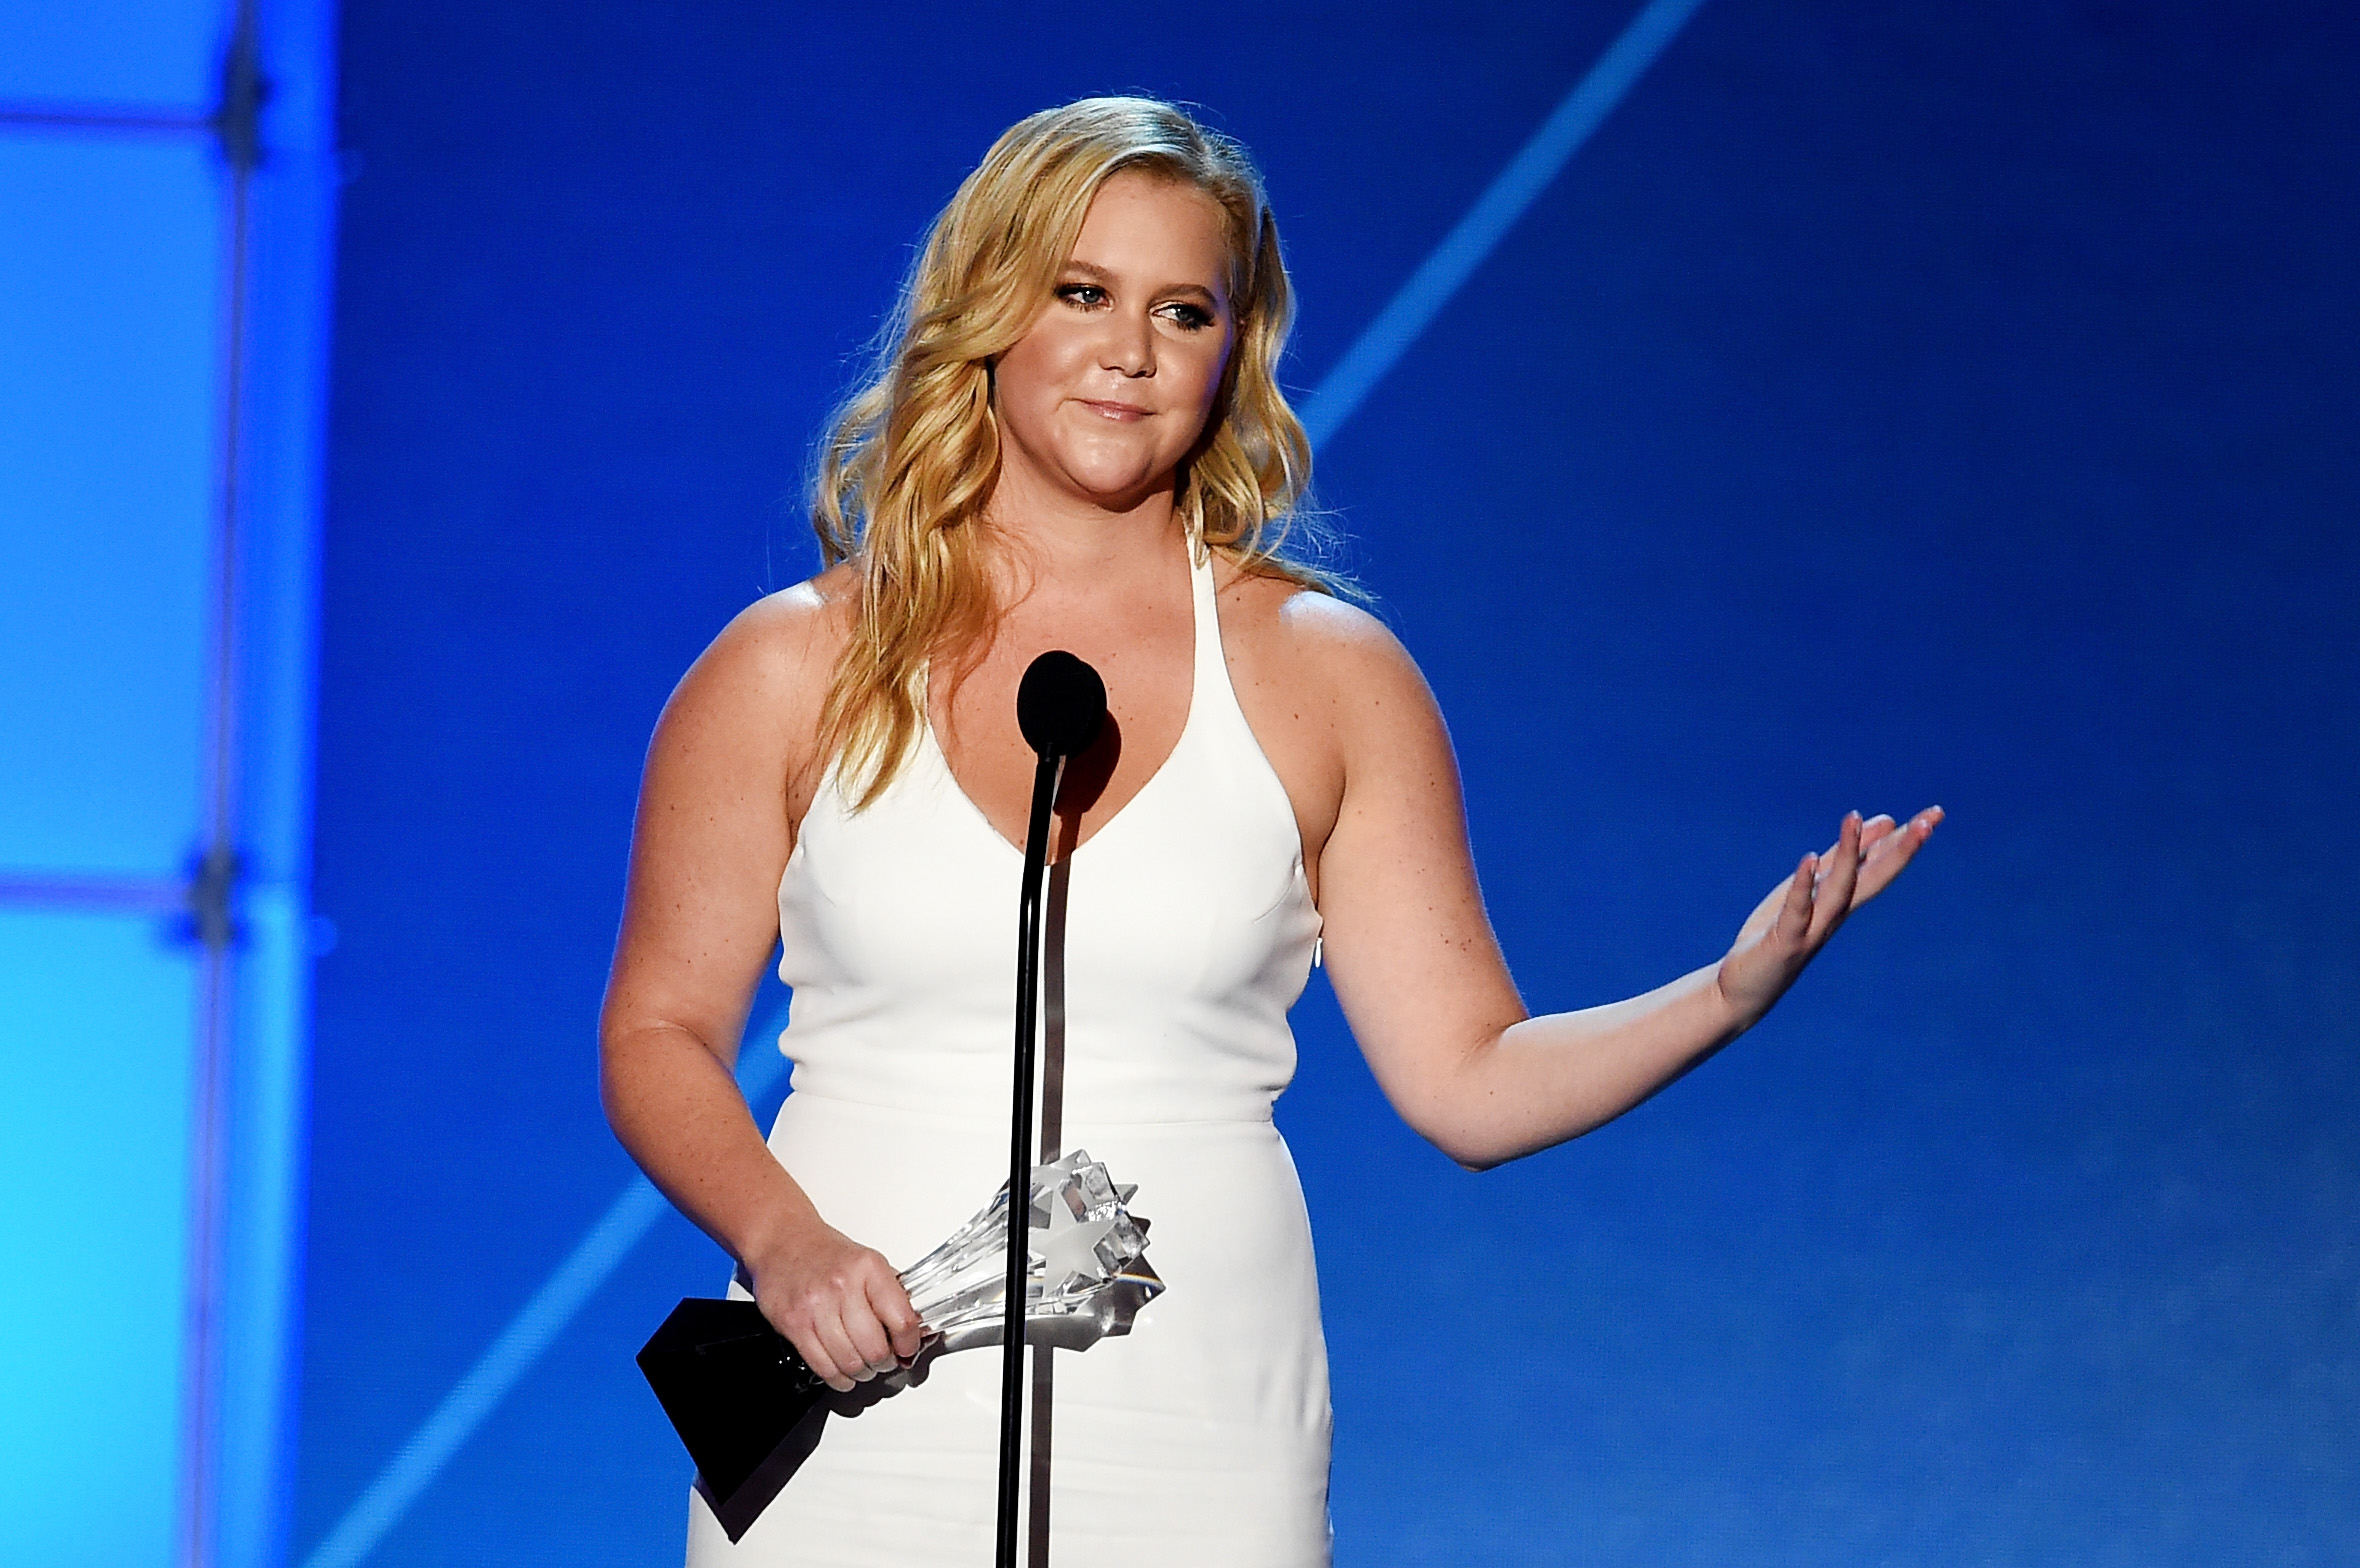 Amy Schumer speaks onstage during the 21st Annual Critics' Choice Awards at Barker Hangar on January 17, 2016 in Santa Monica, California.